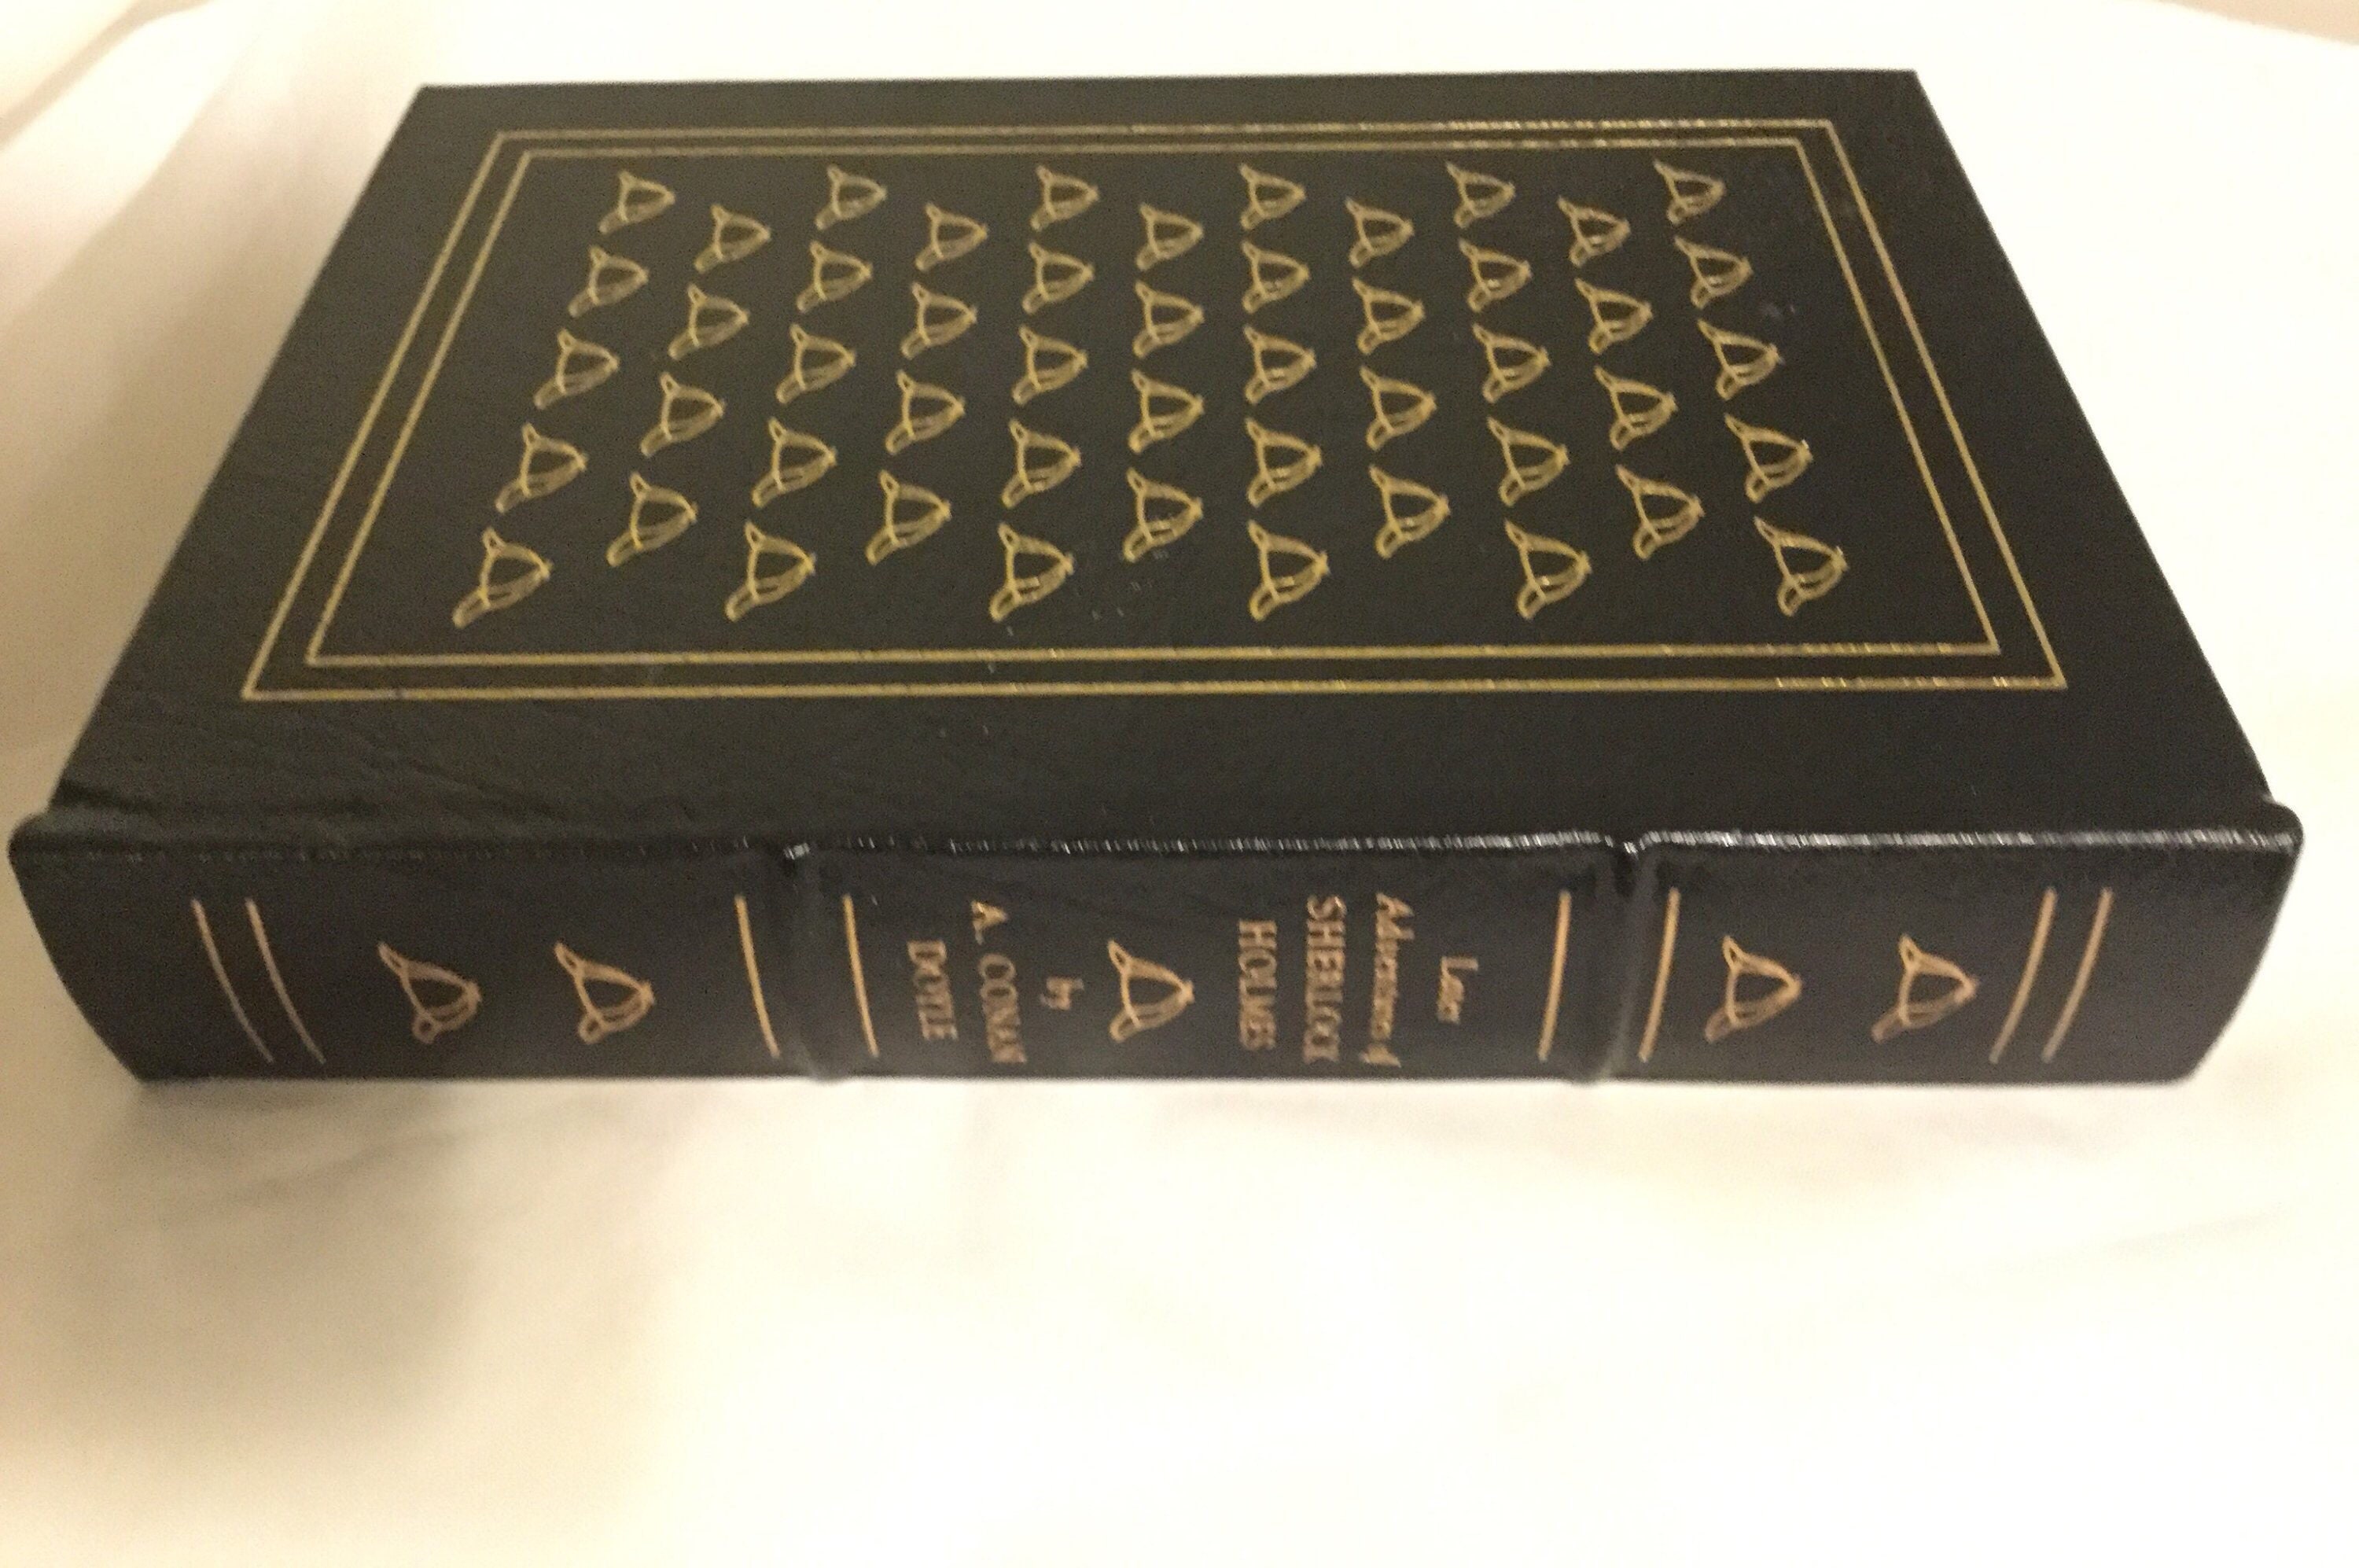 Adventures of Sherlock Holmes Stories by Conan Doyle Leather Bound Hardcover 